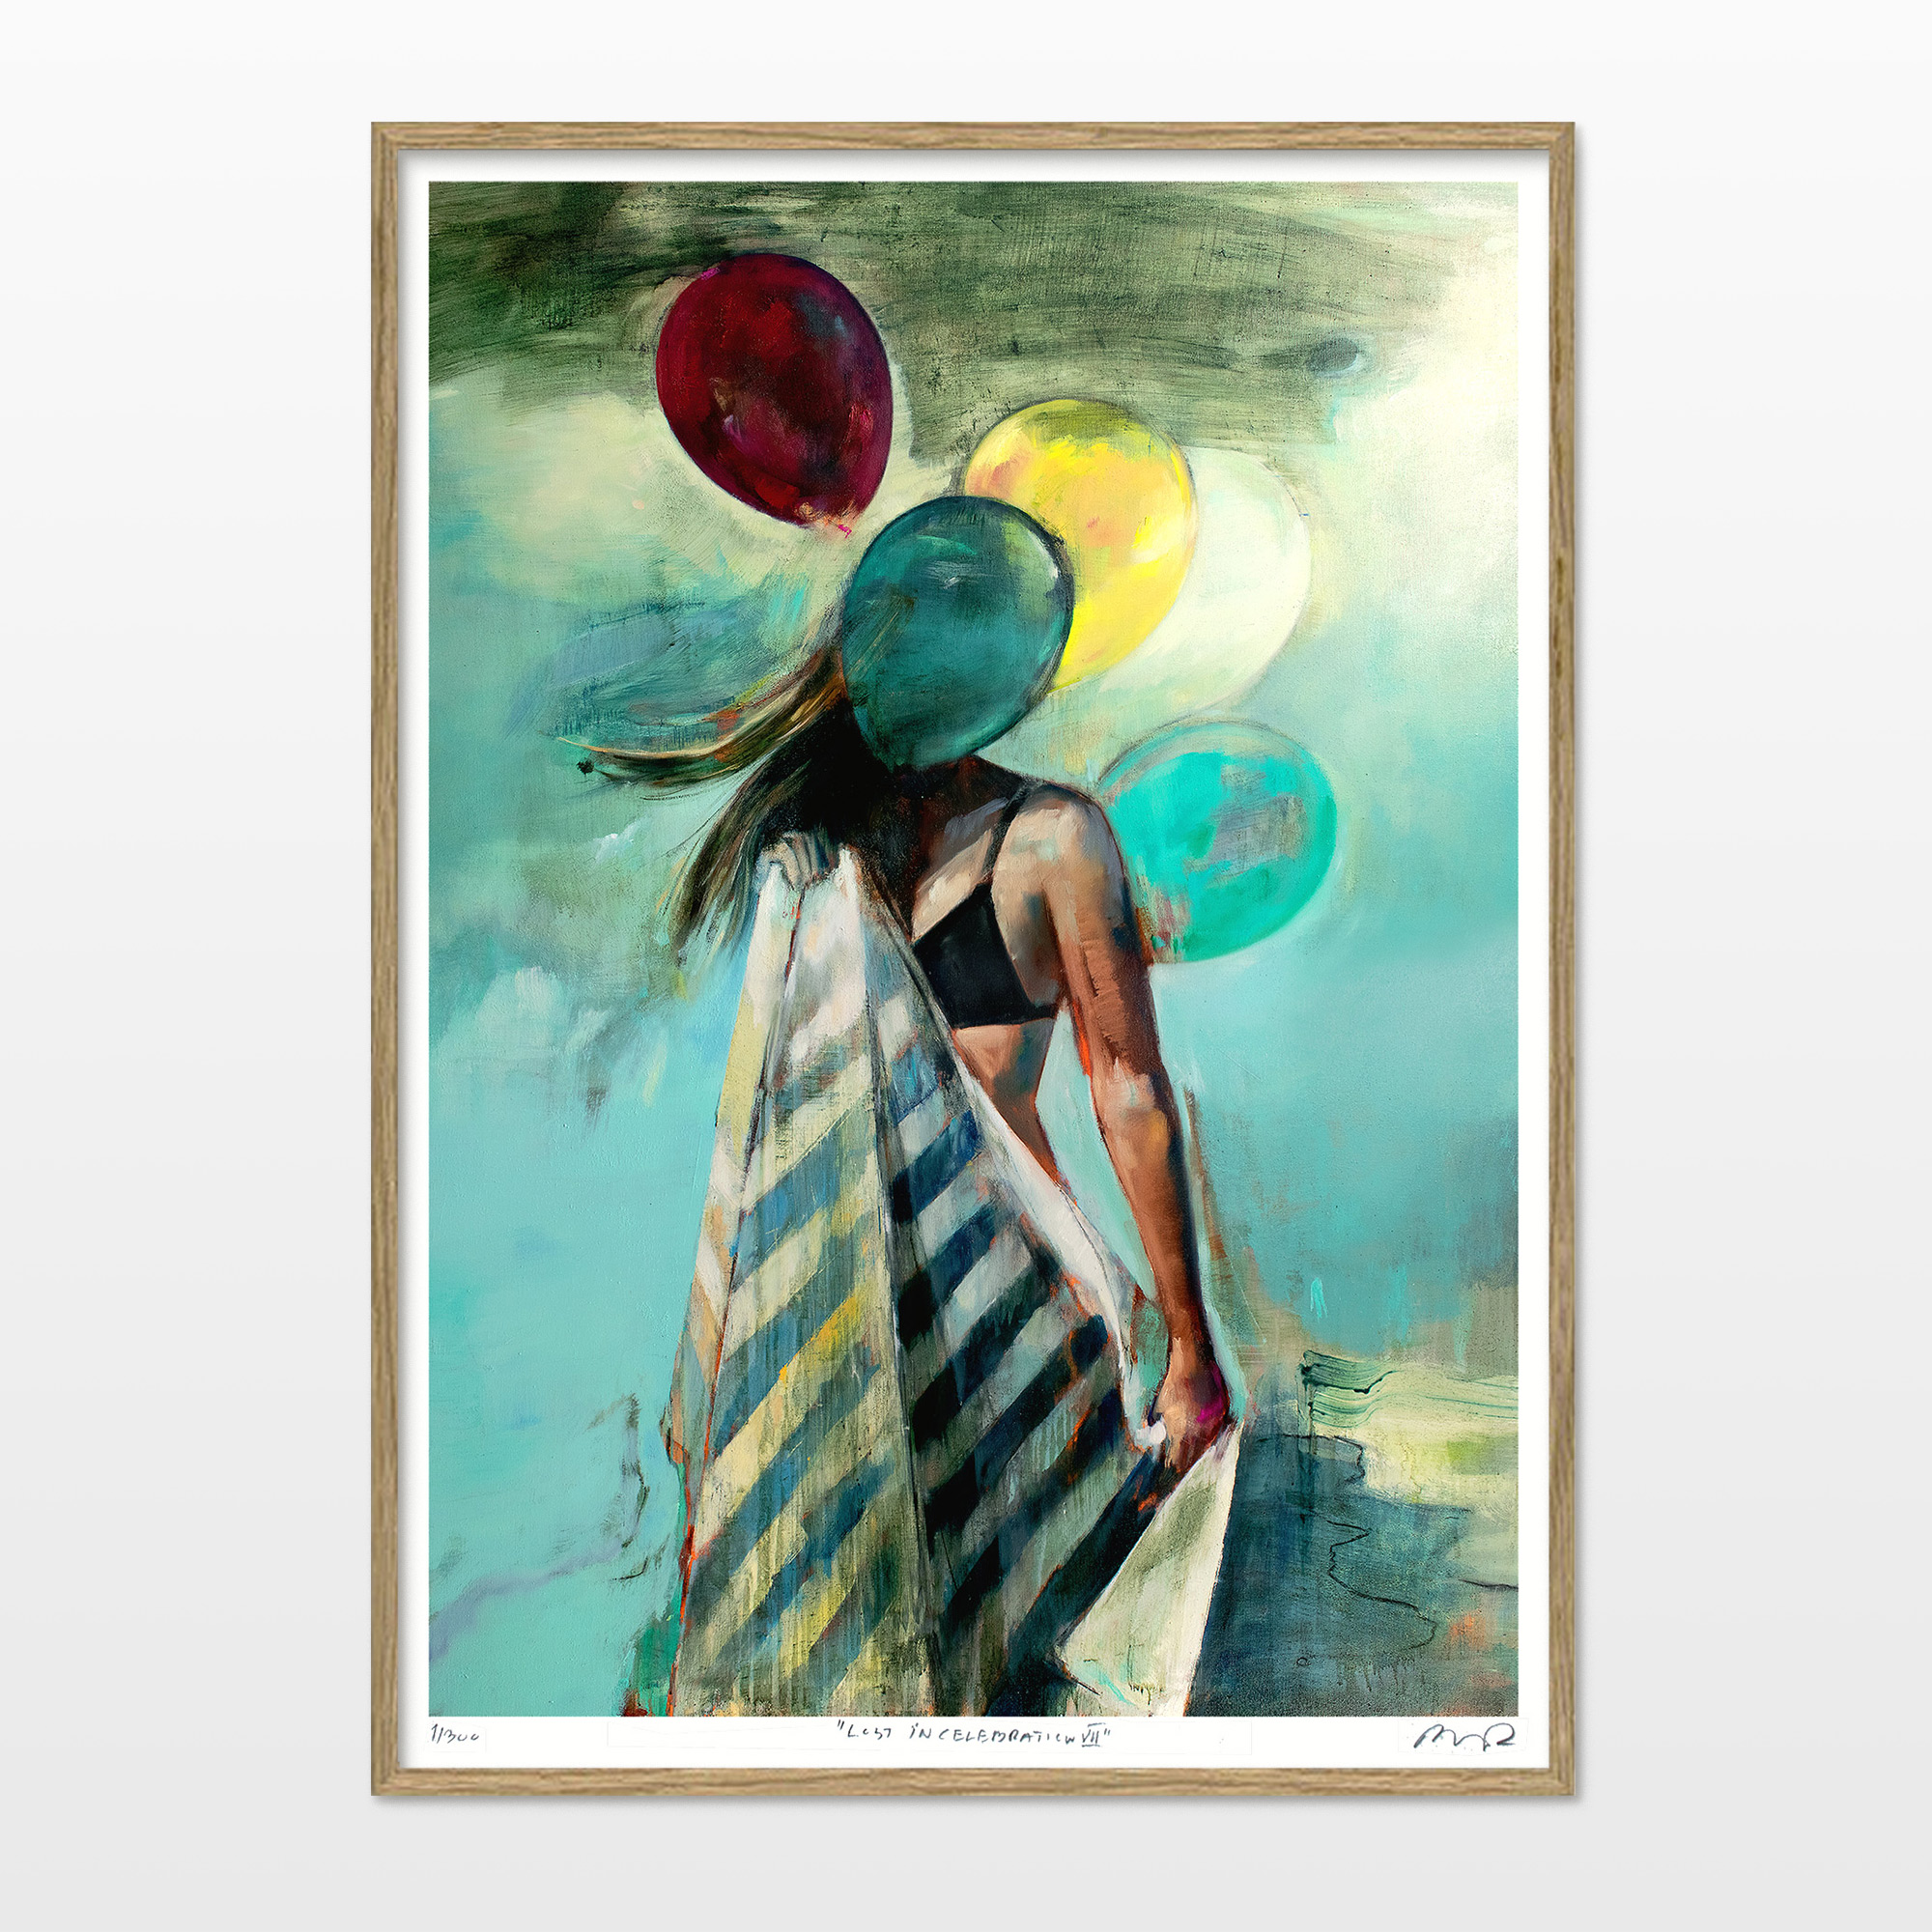 posters-prints, aesthetic, colorful, figurative, graphical, illustrative, landscape, portraiture, bodies, nature, oceans, people, sky, blue, green, turquoise, yellow, ink, paper, beach, beautiful, danish, decorative, design, female, interior, interior-design, nordic, posters, pretty, scandinavien, summer, women, Buy original high quality art. Paintings, drawings, limited edition prints & posters by talented artists.